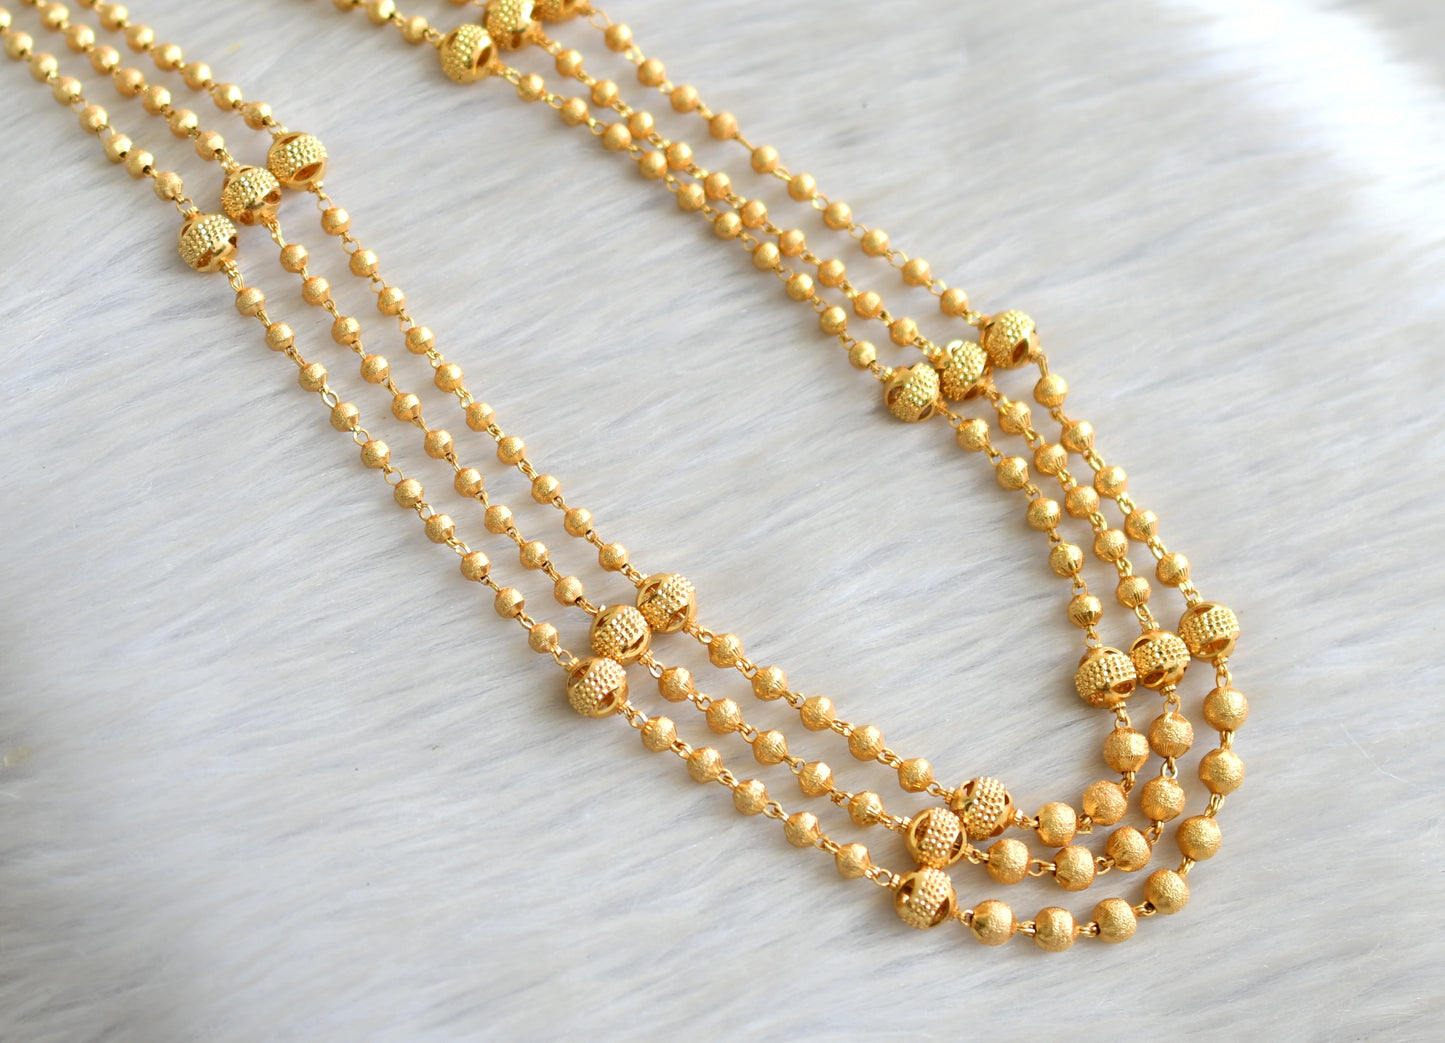 Gold tone multilayer ball chain/necklace dj-42886